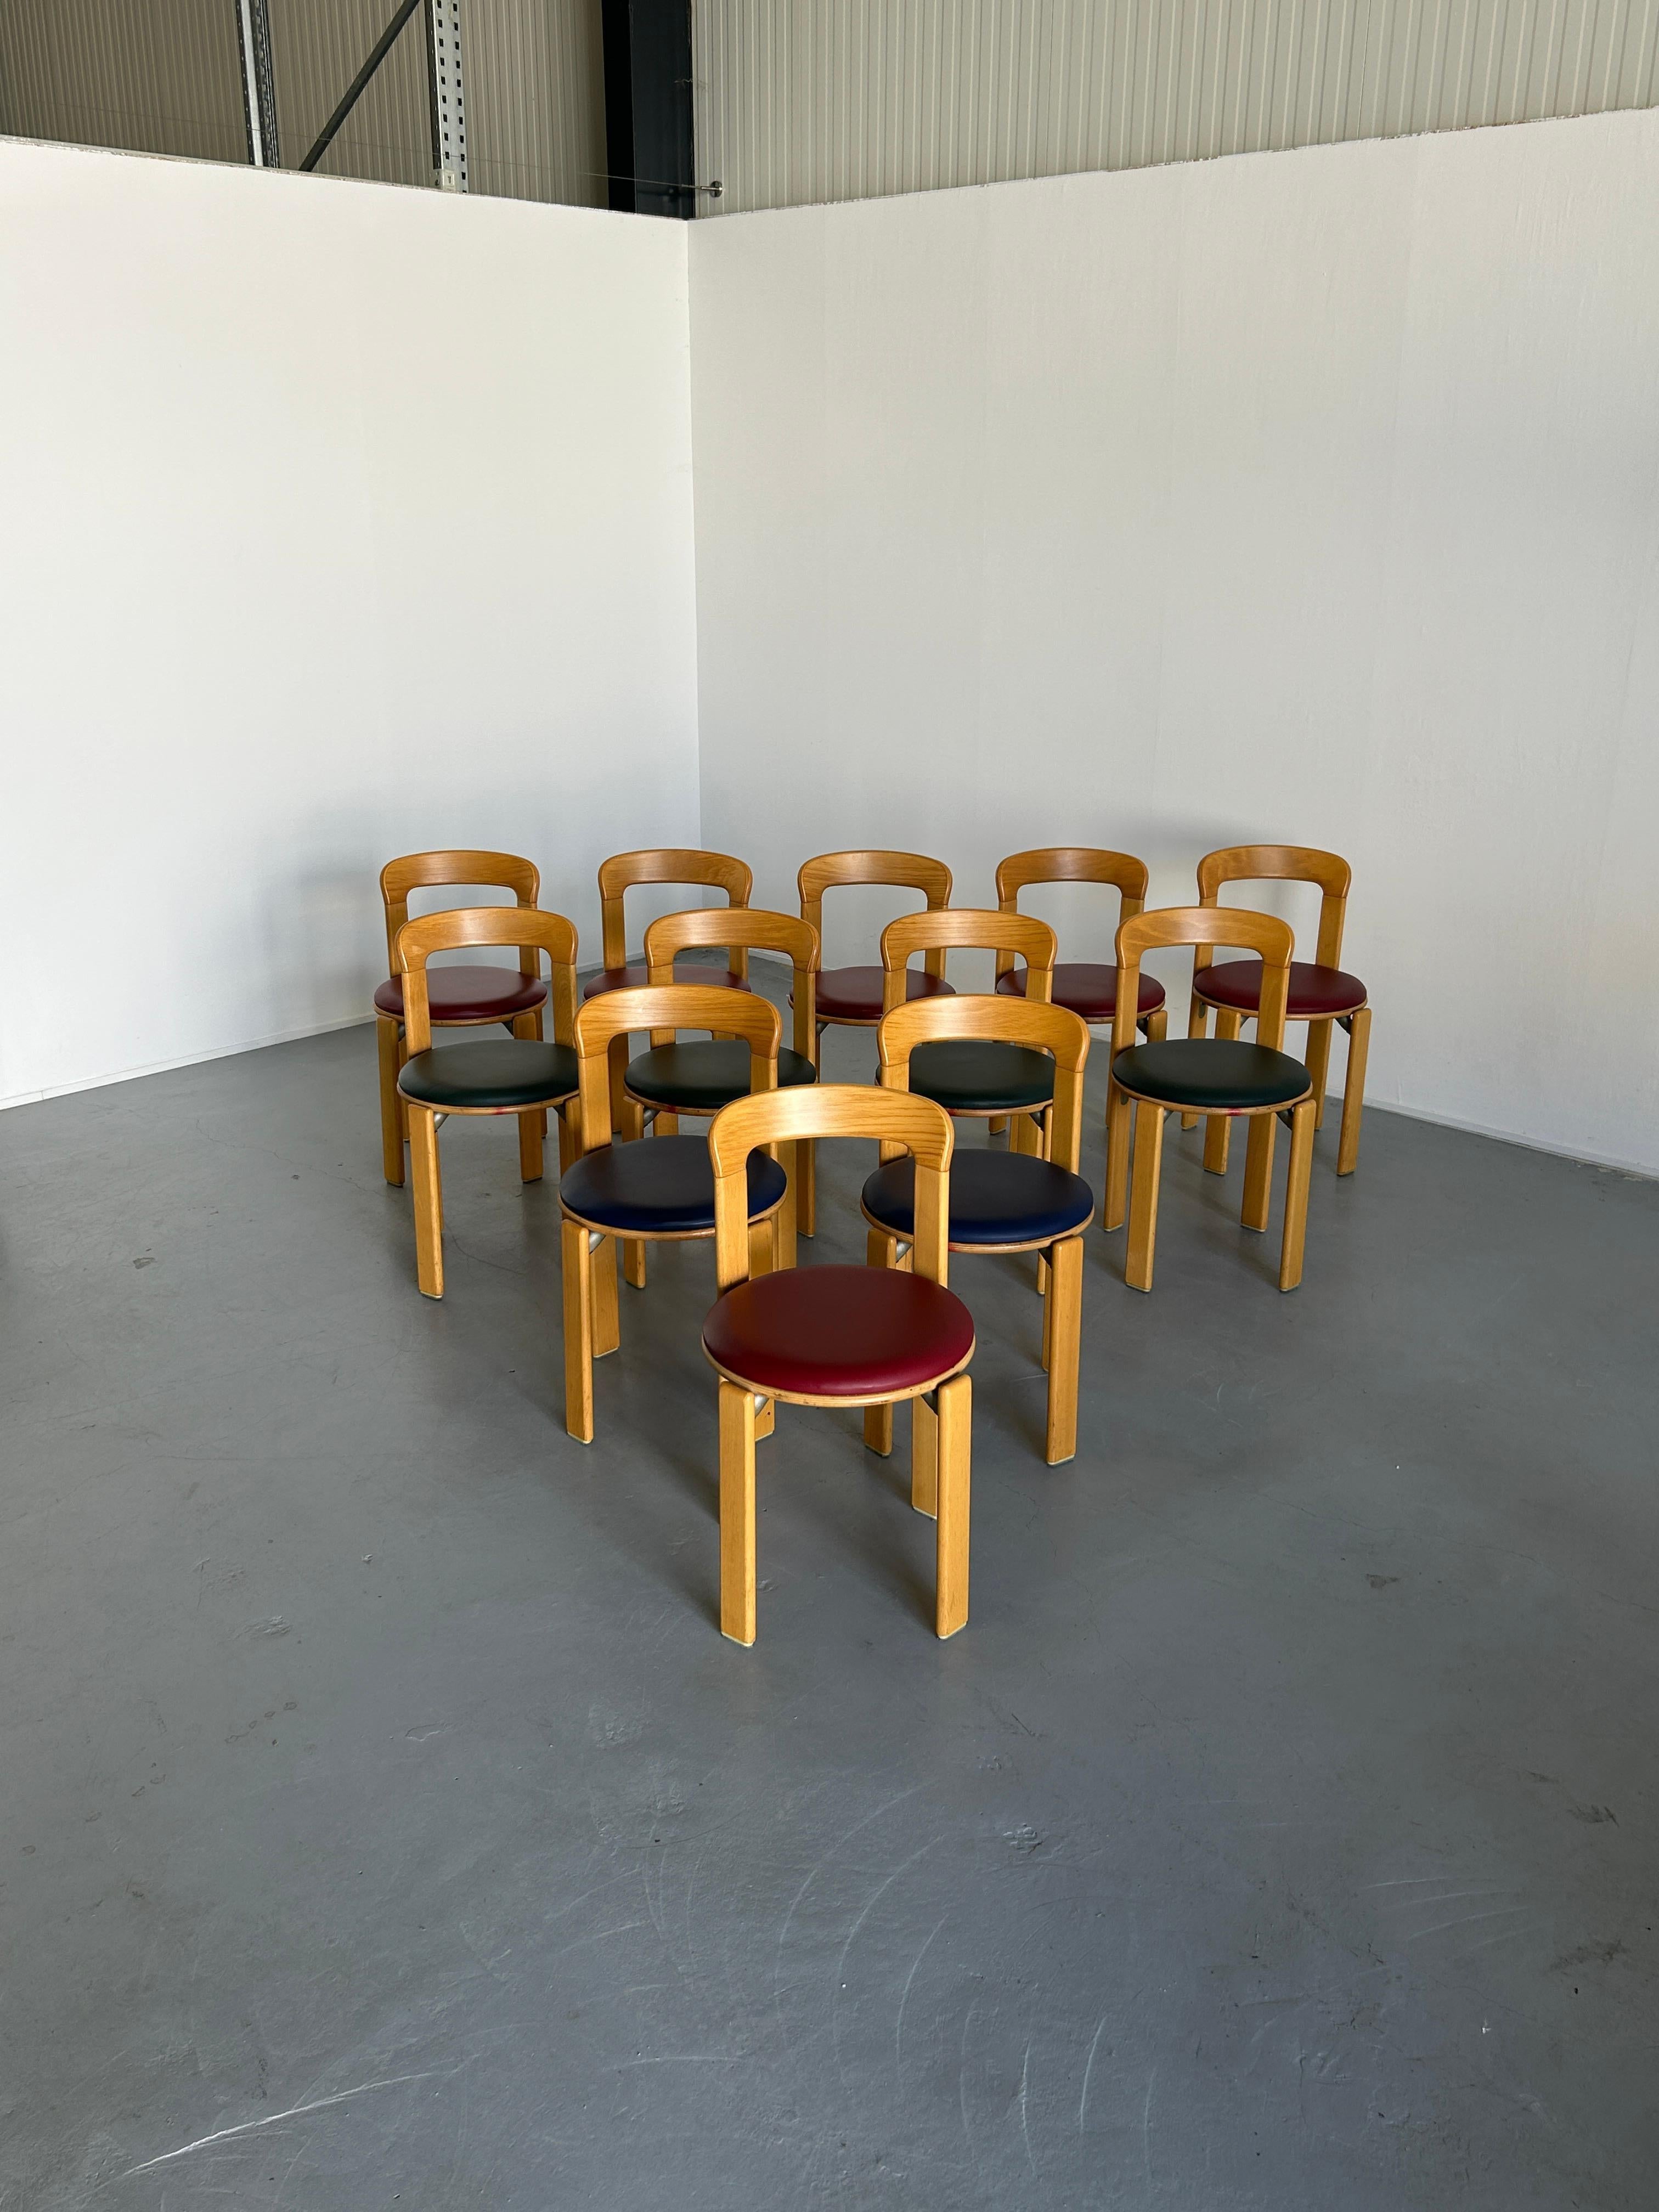 Set of six Mid-Century-Modern dining chairs designed by Bruno Rey in the 1970s. 
Iconic design, produced by the well known Germany manufacturer Kusch+Co in the early 1990s..

The dining chairs were made of solid beech, laminated plywood beech and